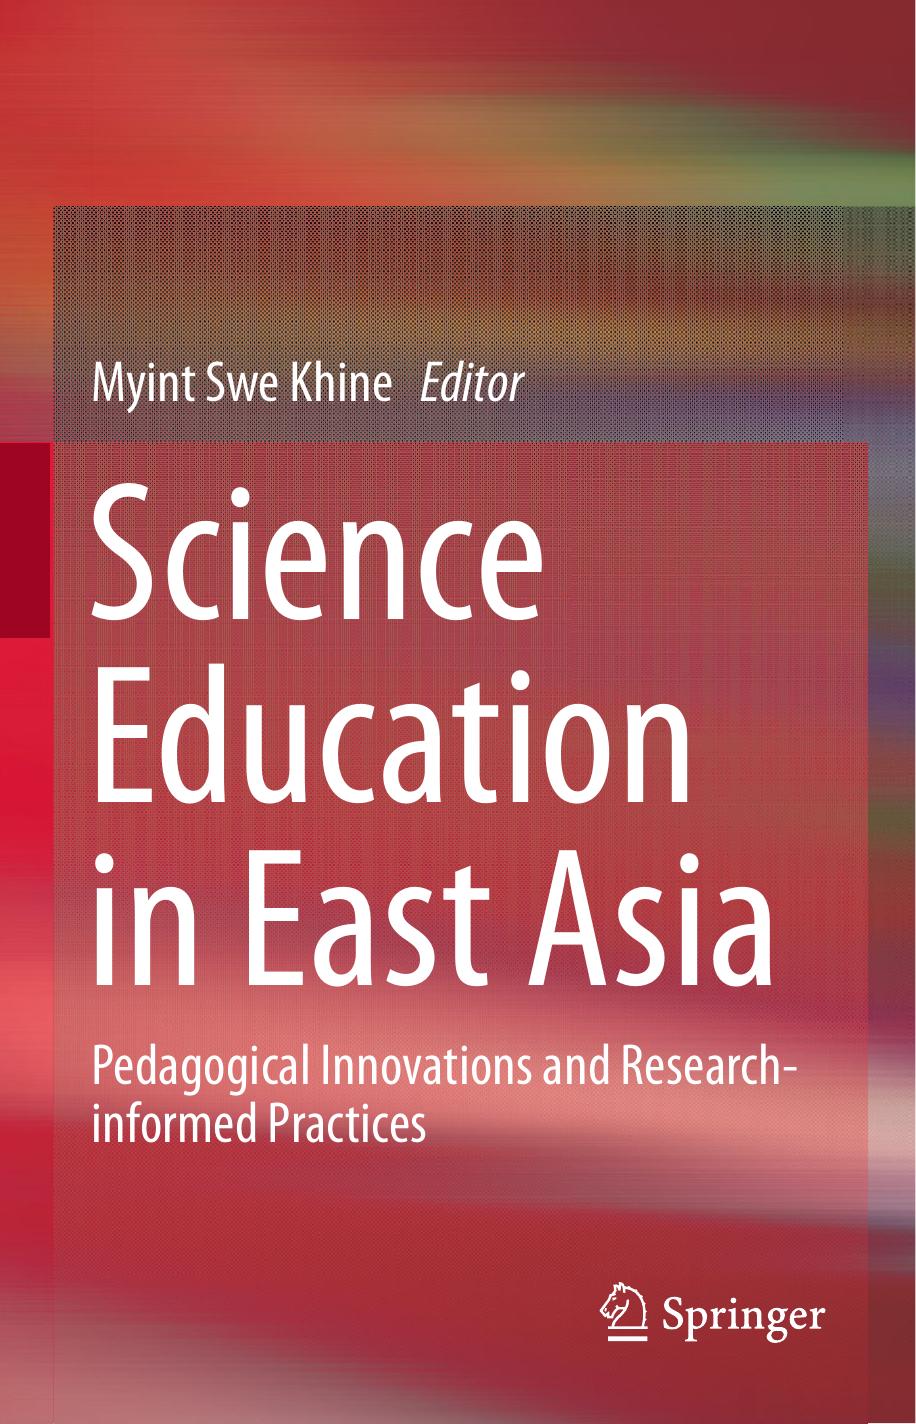 Science Education in East Asia  Pedagogical Innovations and Research-informed Practices ( PDFDrive.com )